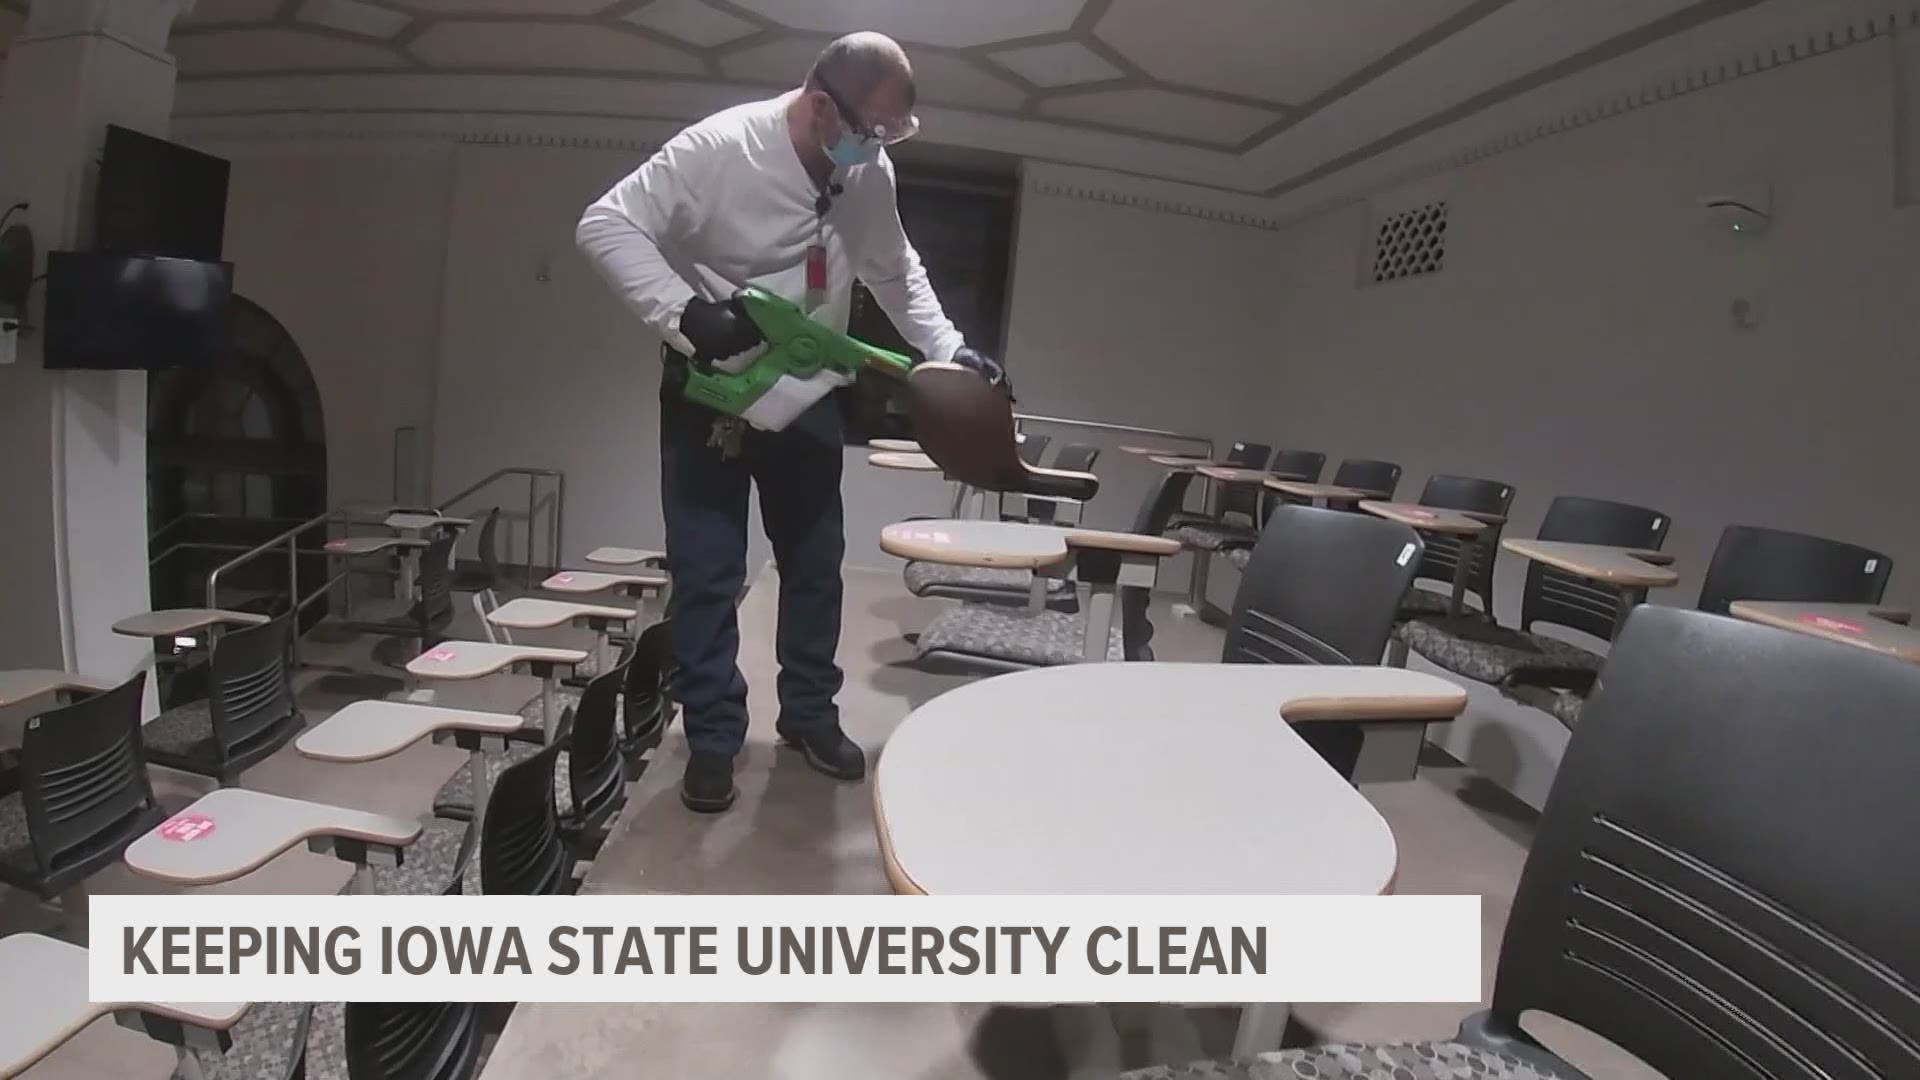 A custodian at Iowa State University said it can take him up to three hours to clean an auditorium, with the new cleaning checklist he must now follow.